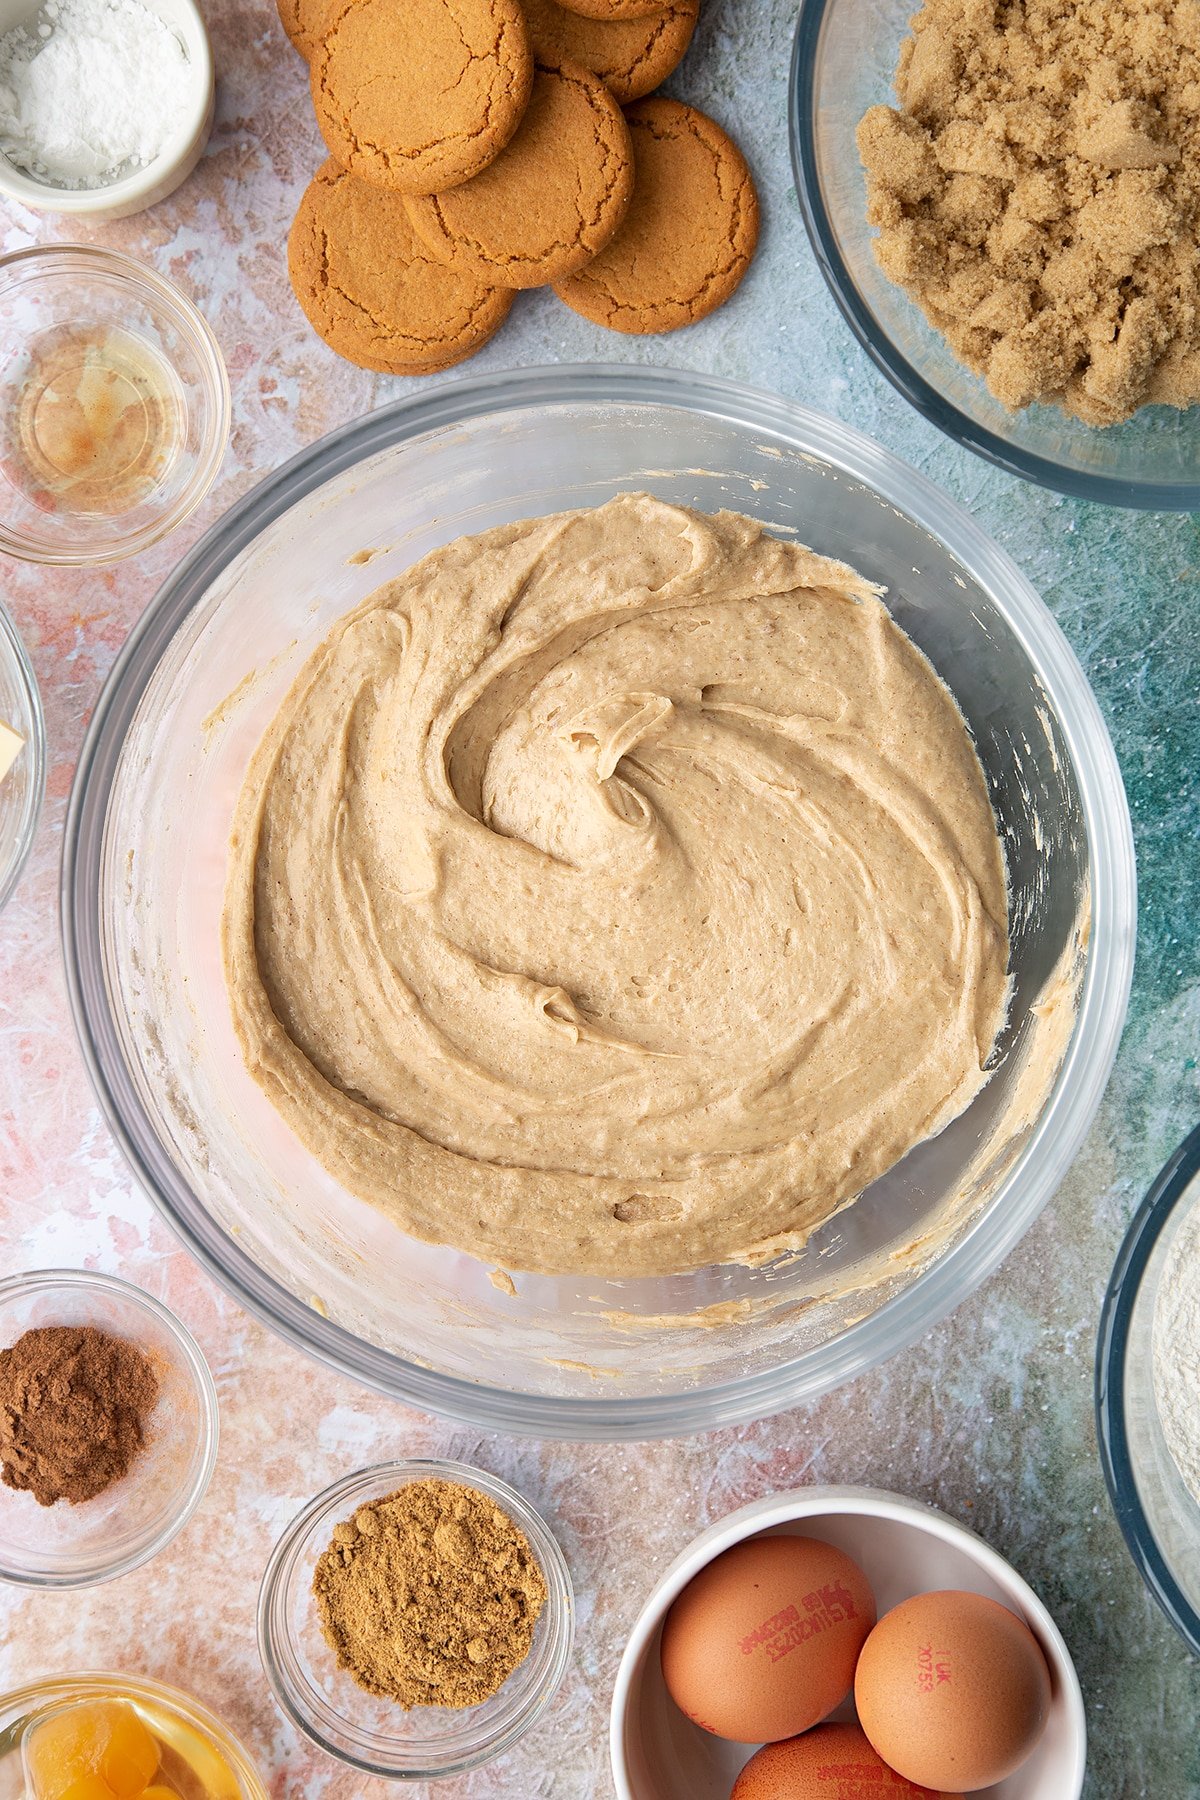 Ginger cake batter in a mixing bowl. Ingredients to make ginger cupcakes surround the bowl.